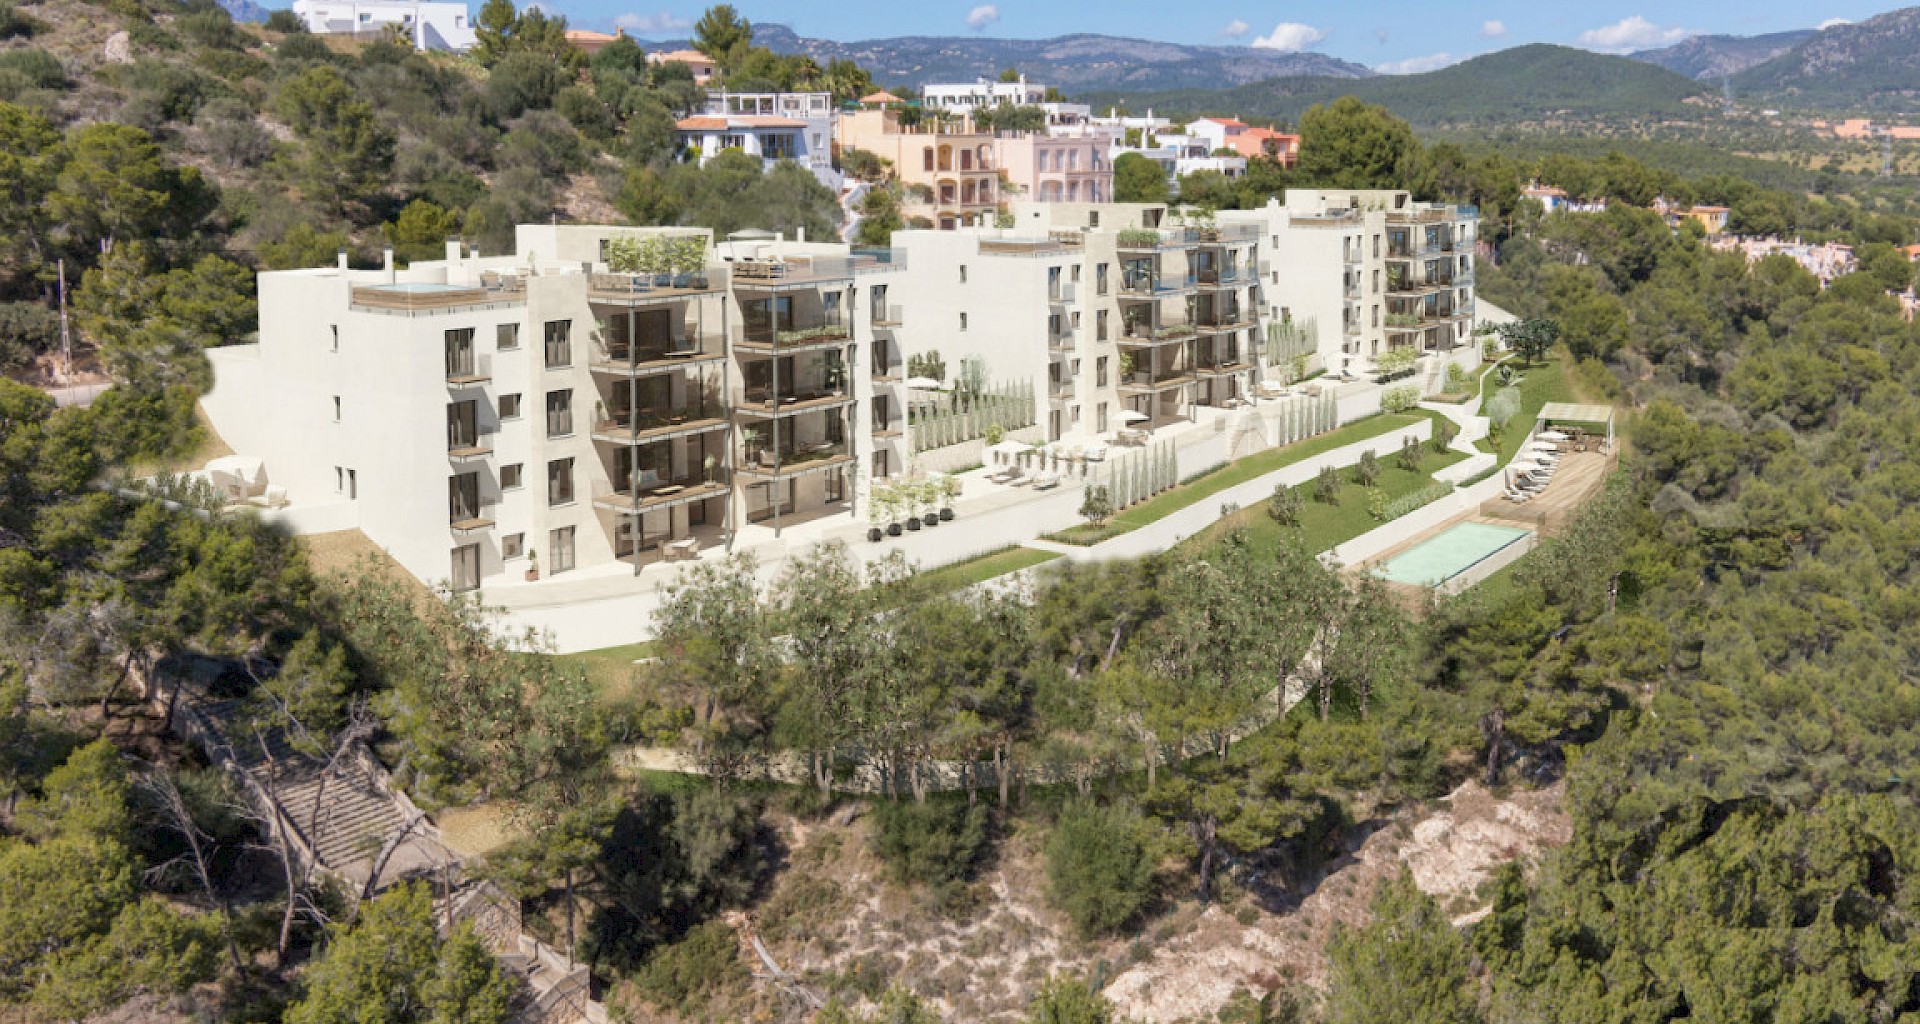 KROHN & LUEDEMANN New build luxury condo in Santa Ponsa in a prime location with beautiful views of the countryside 